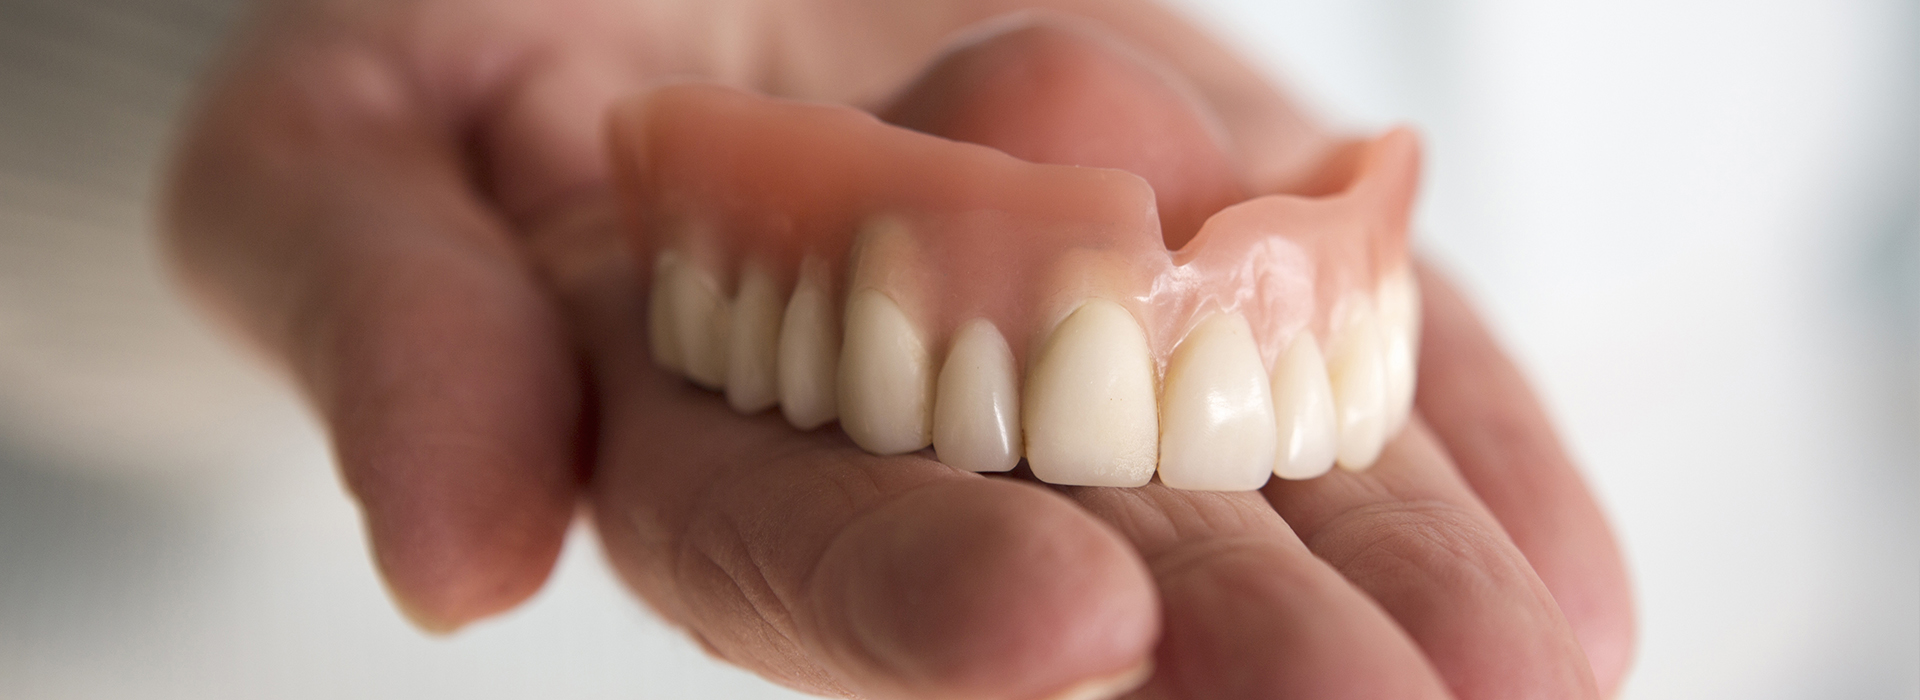 A person s hand holding a set of dentures.